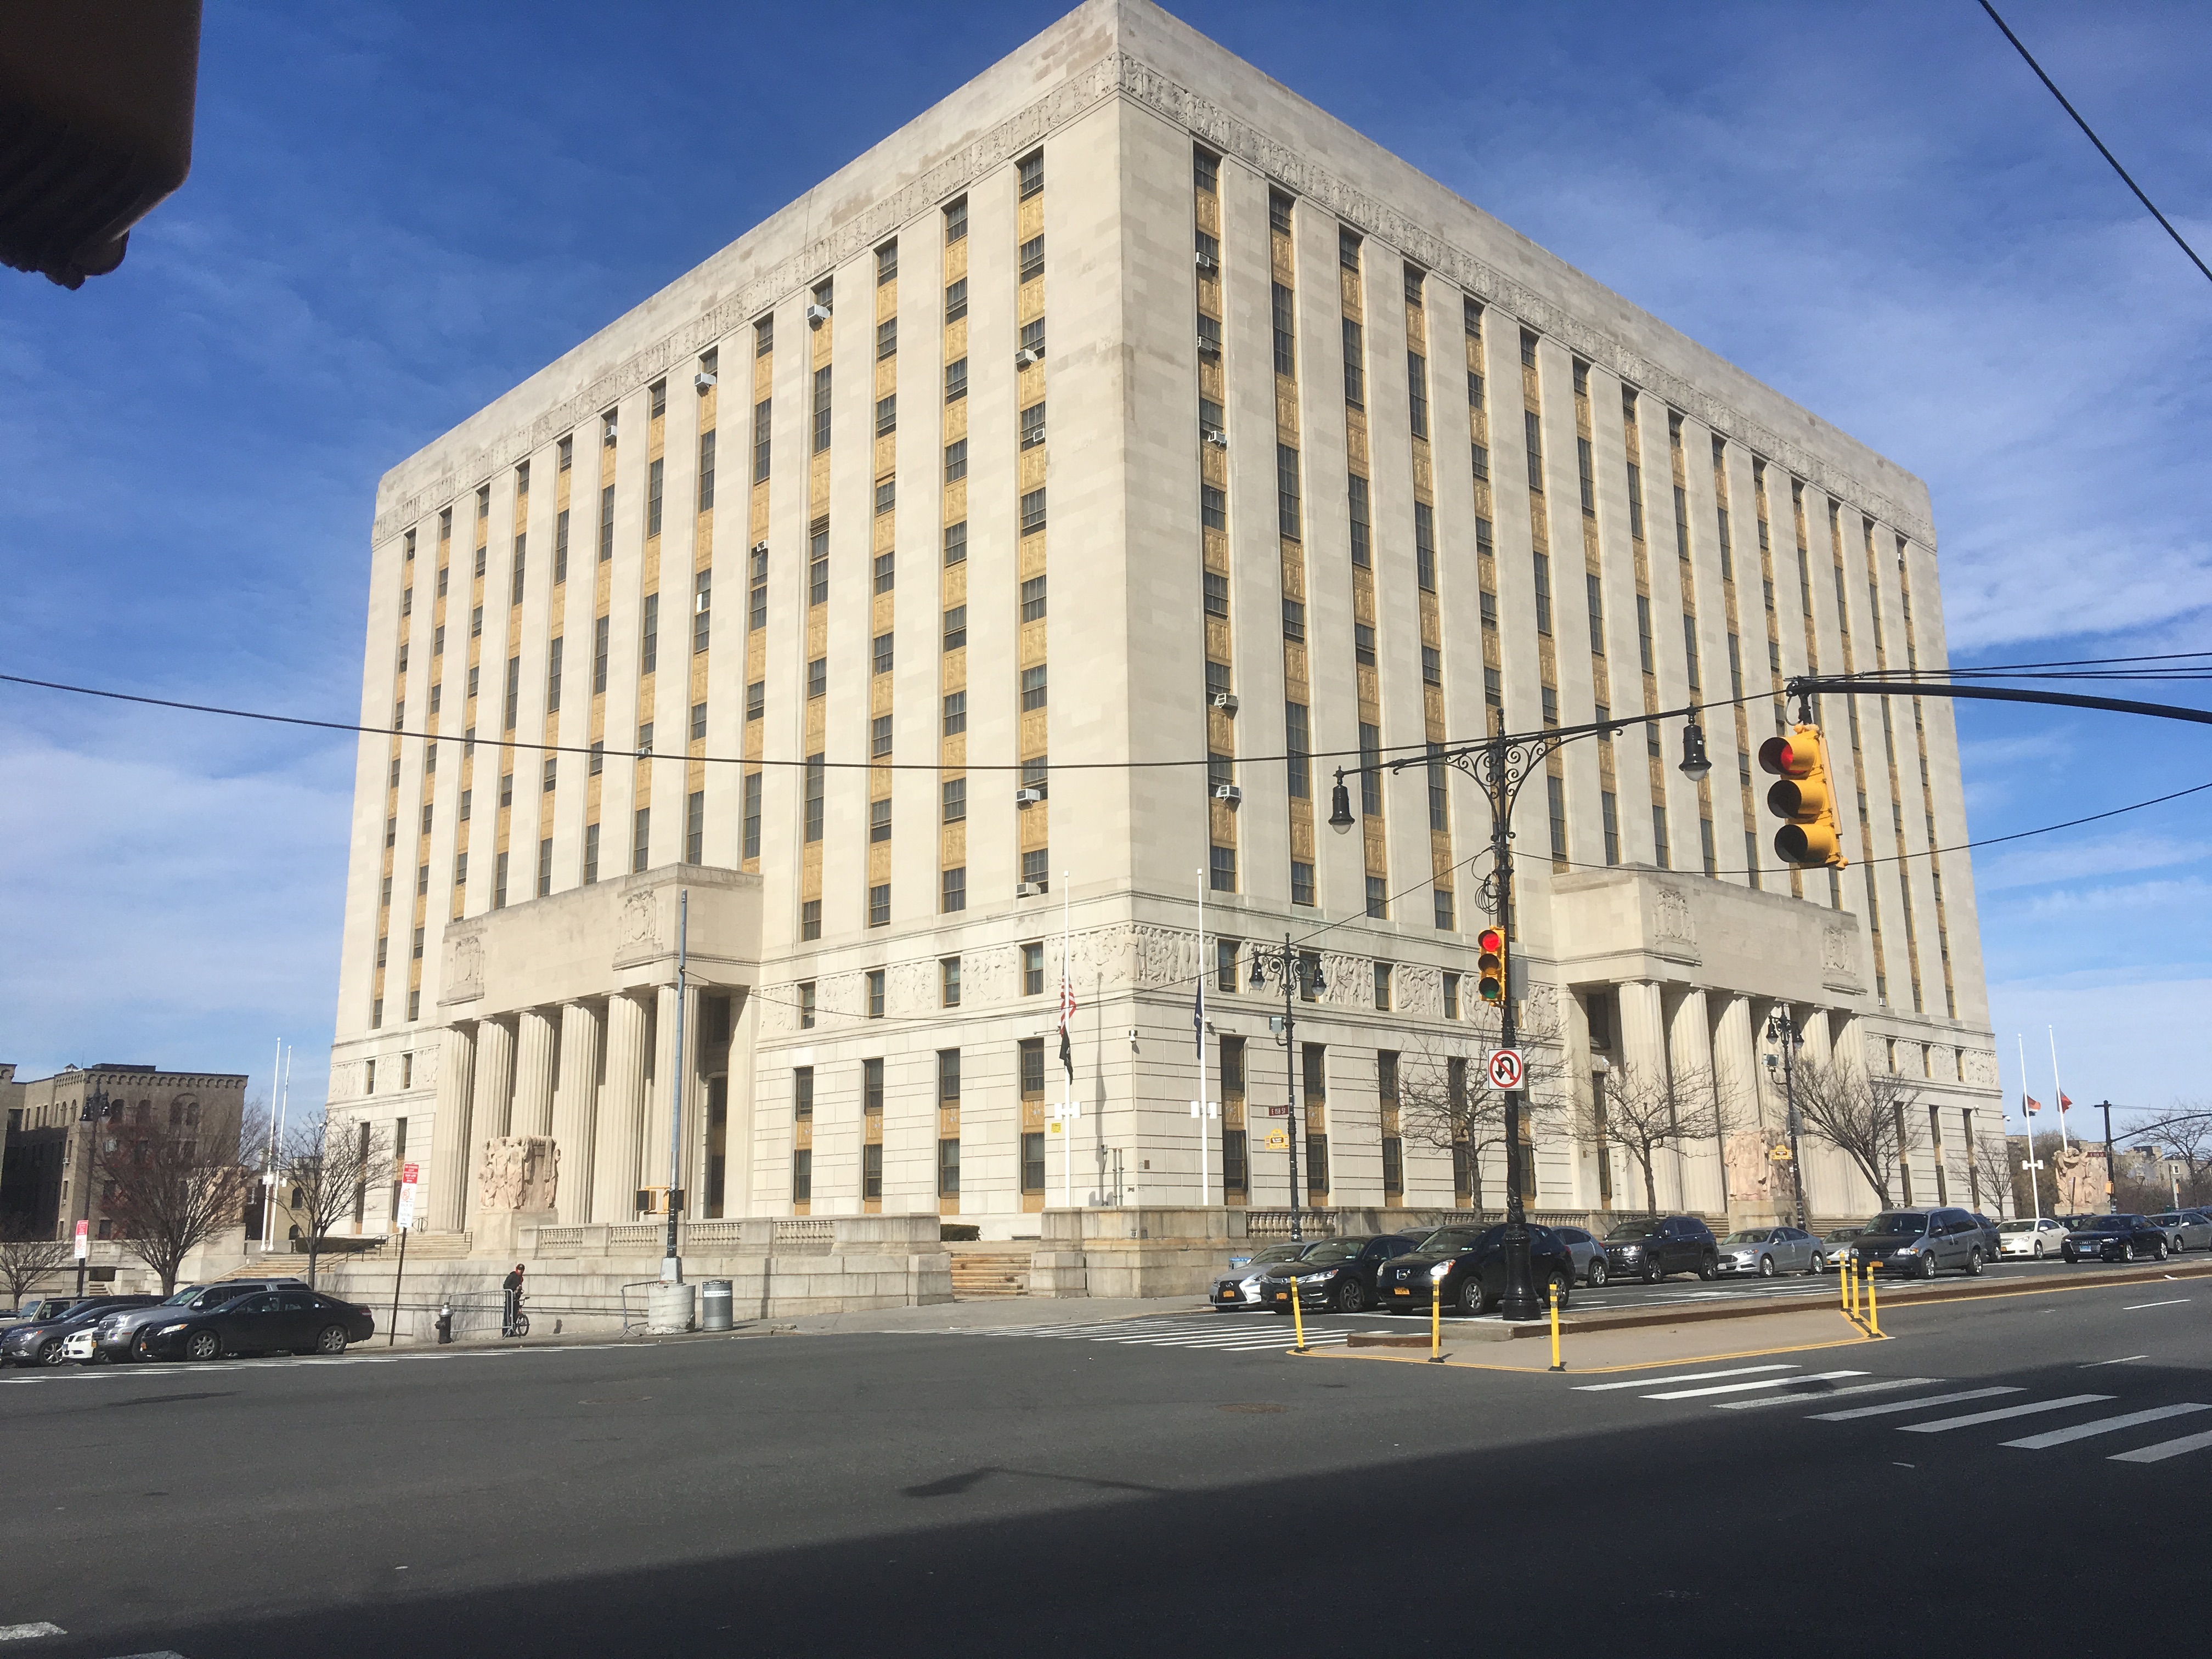 Bronx County Courthouse